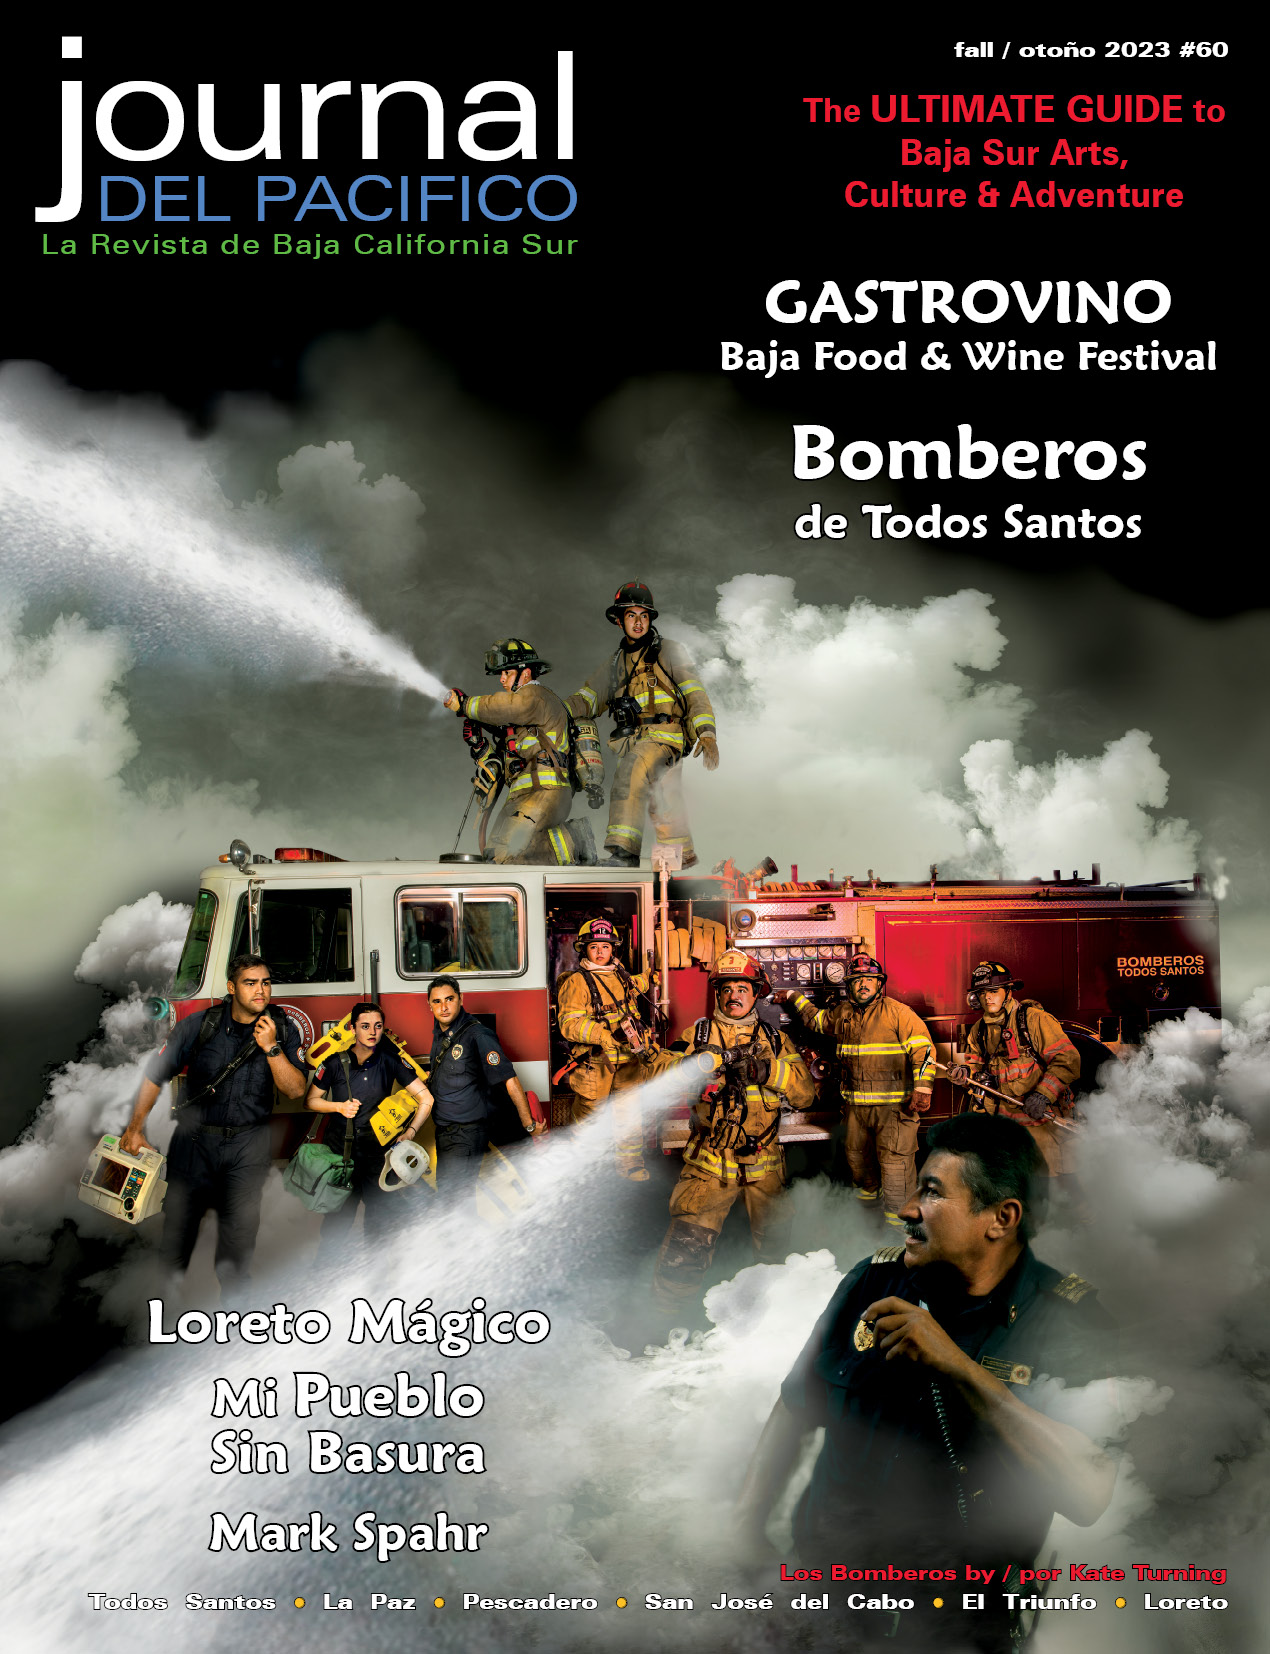 Fall/Otoño 2023 Issue of Journal del Pacifico